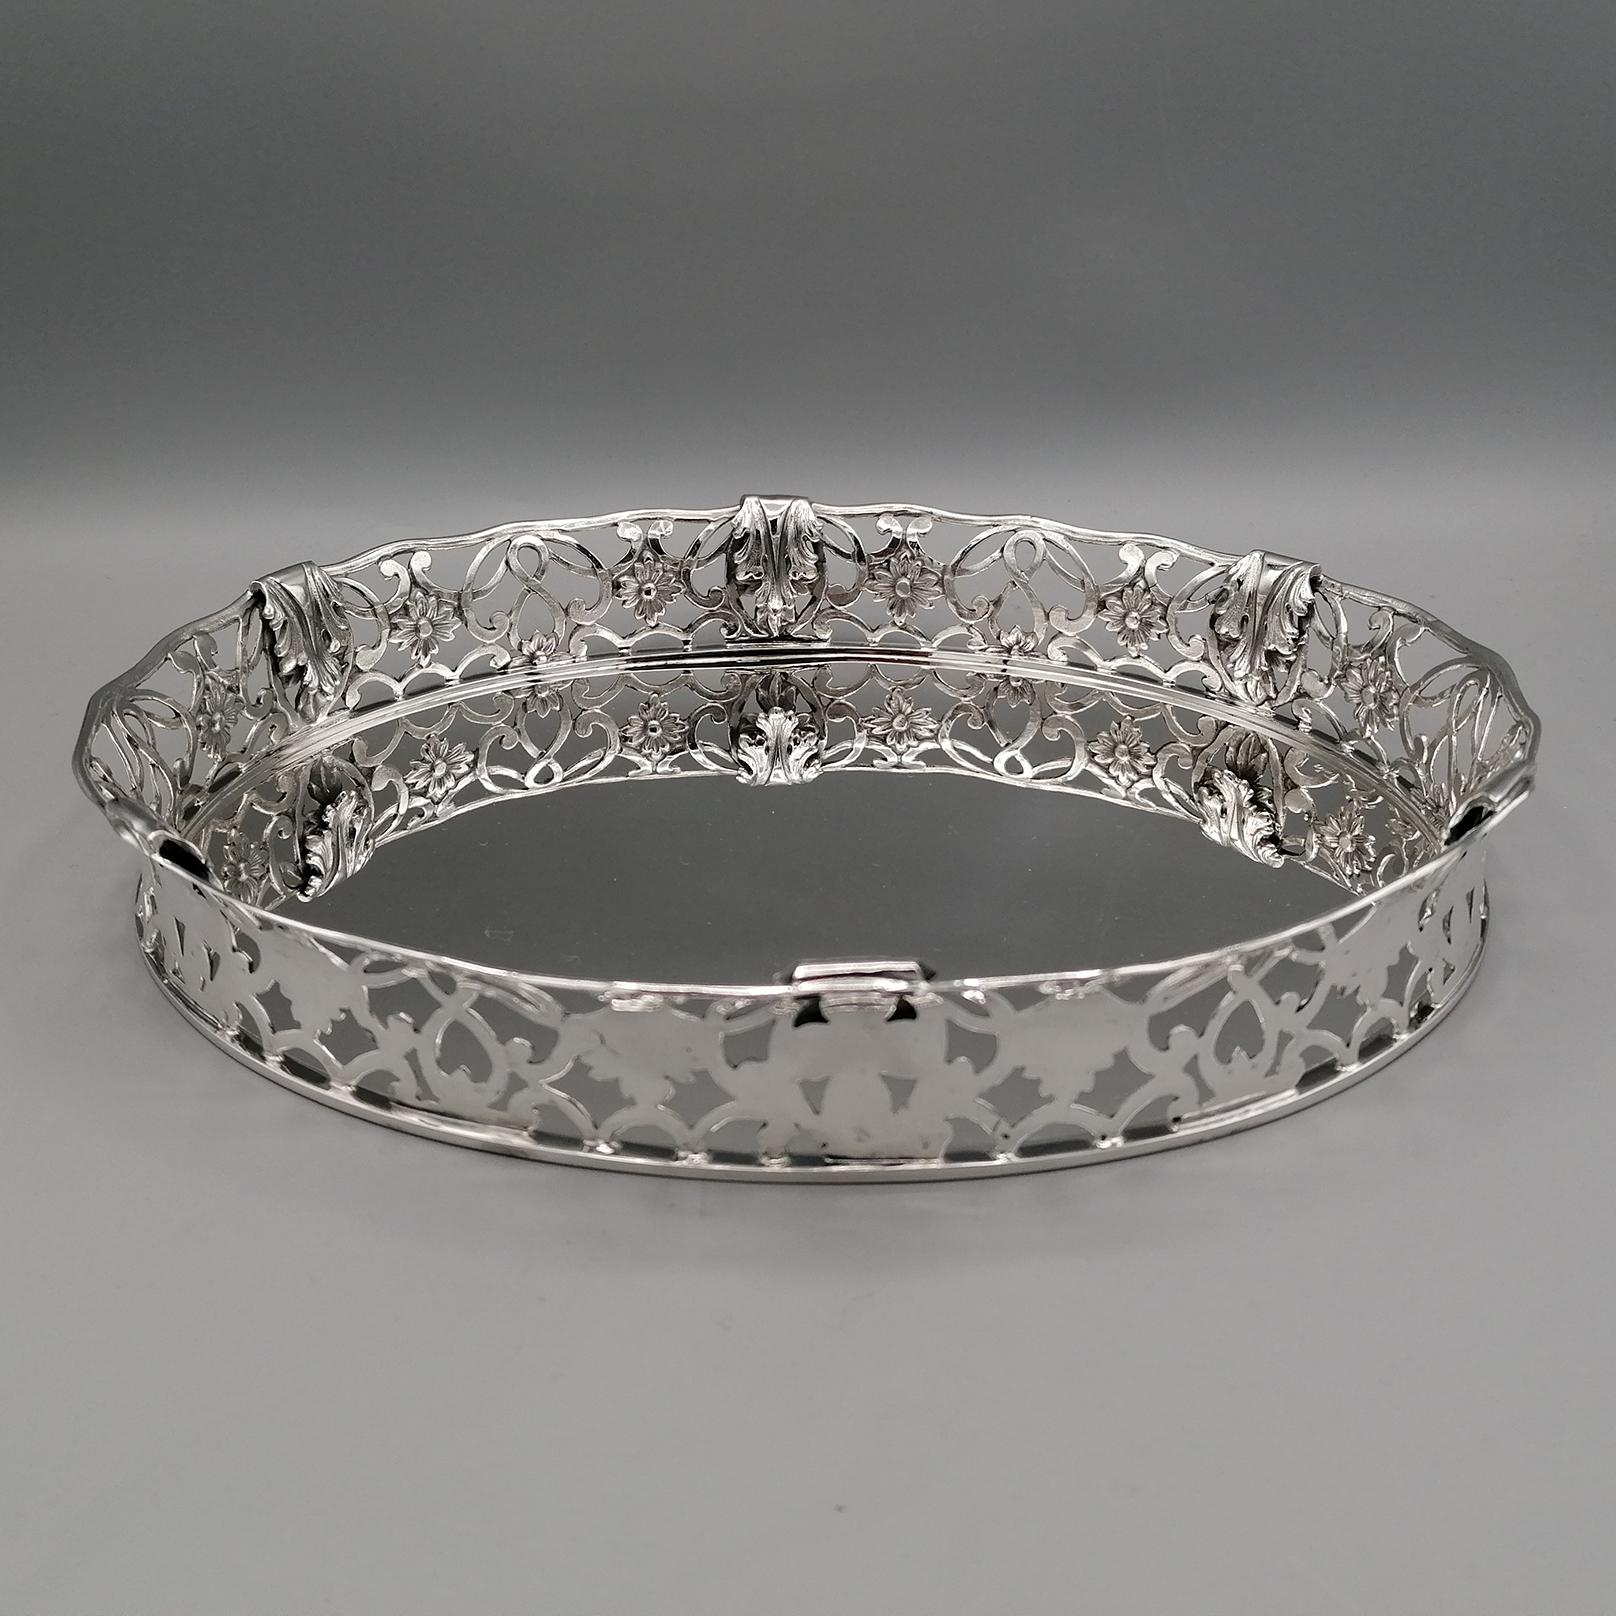 Completely handmade sterling silver oval basket. The basket or tray shape is decorated with a border made with the fusion technique and subsequently chiseled and engraved. The border is decorated with openwork flowers and acanthus leaves.
A wavy